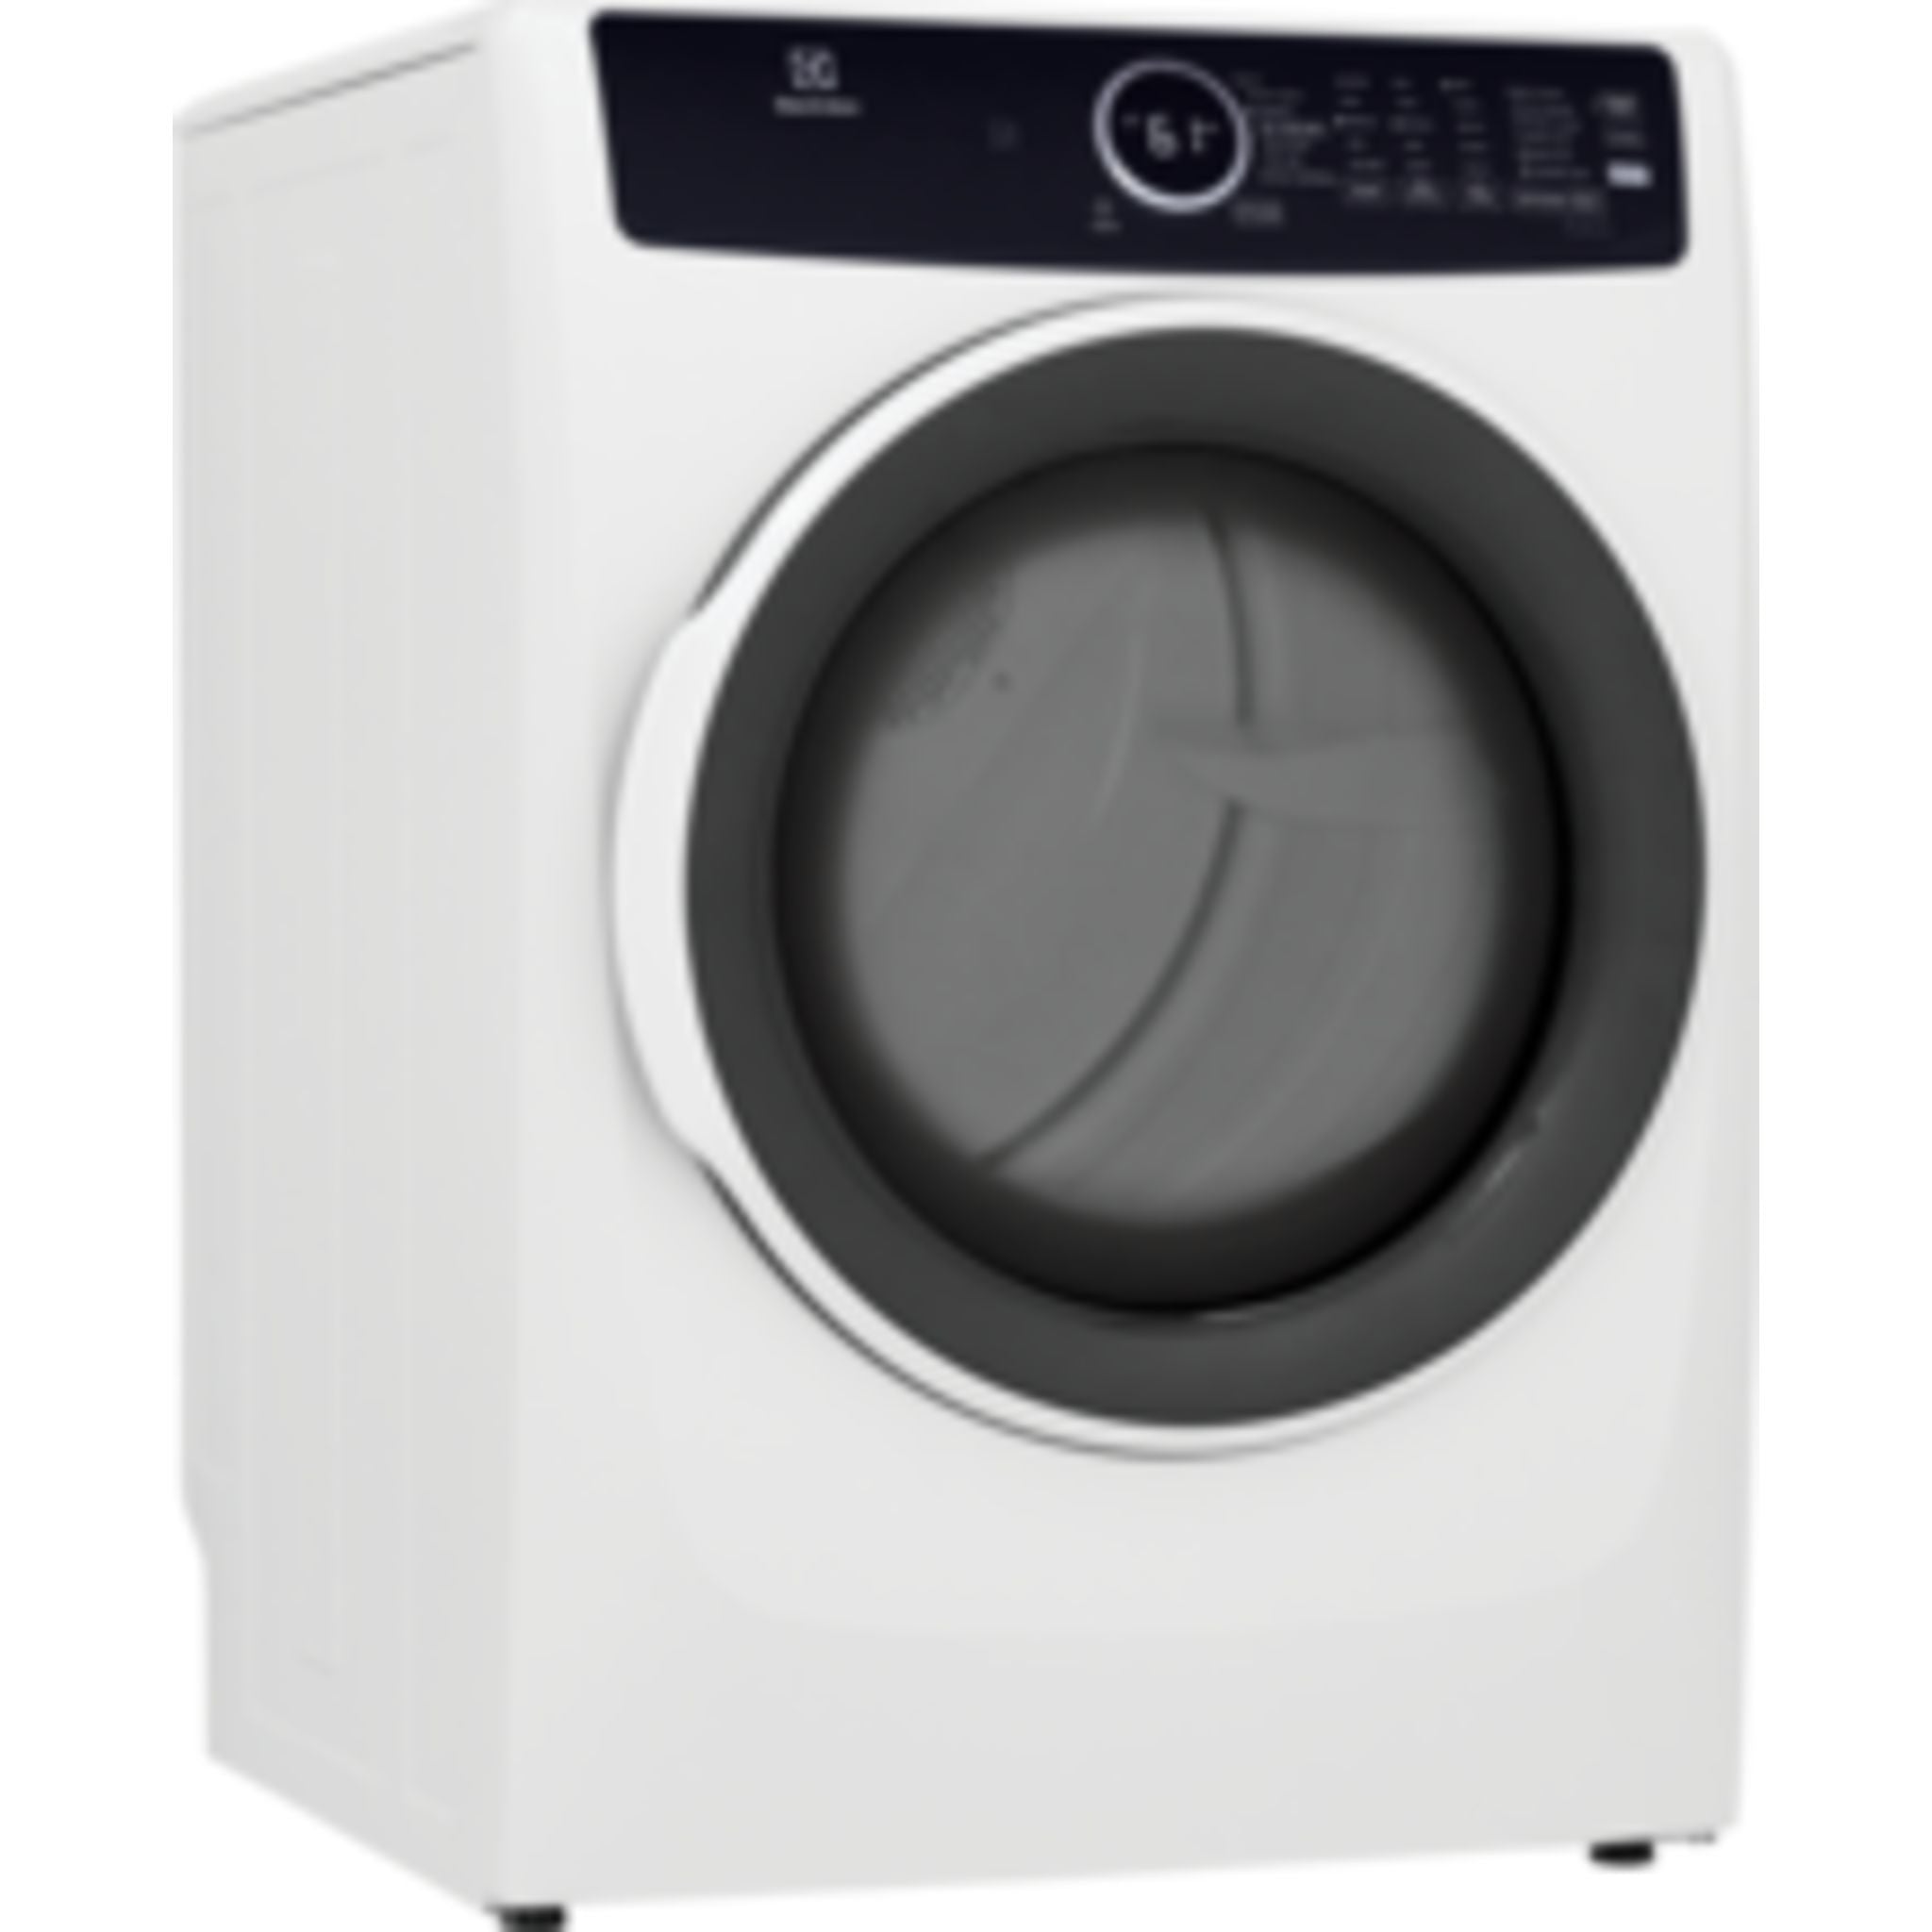 Electrolux Home Products, Electrolux Dryer (ELFE743CAW) - White